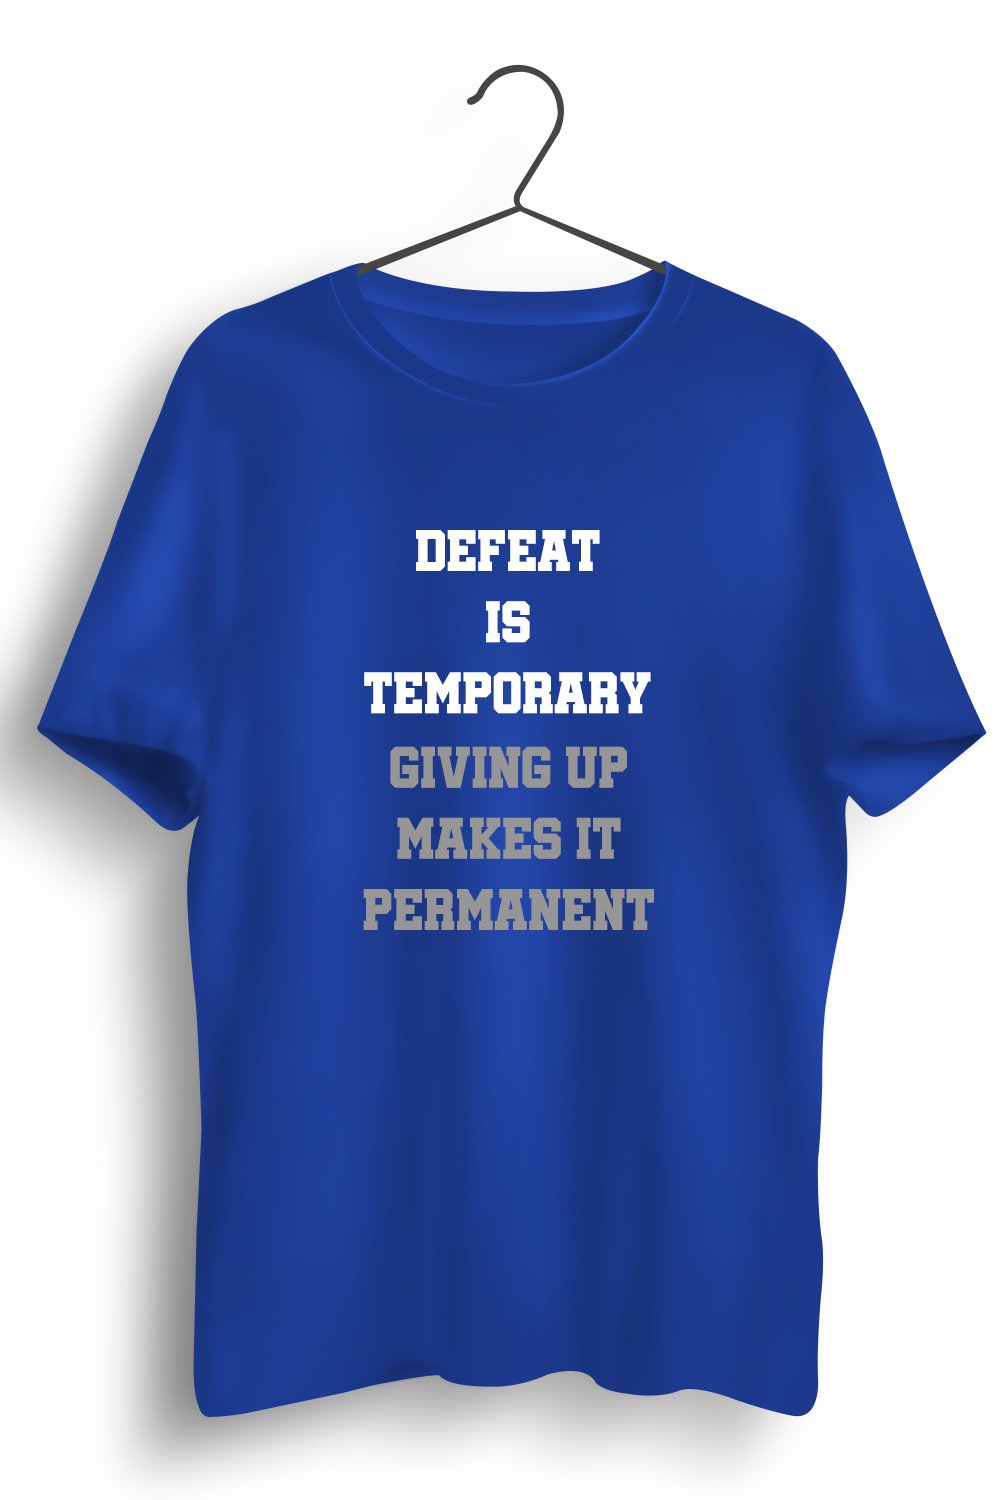 Defeat Is Temporary Graphic Printed Blue Tshirt